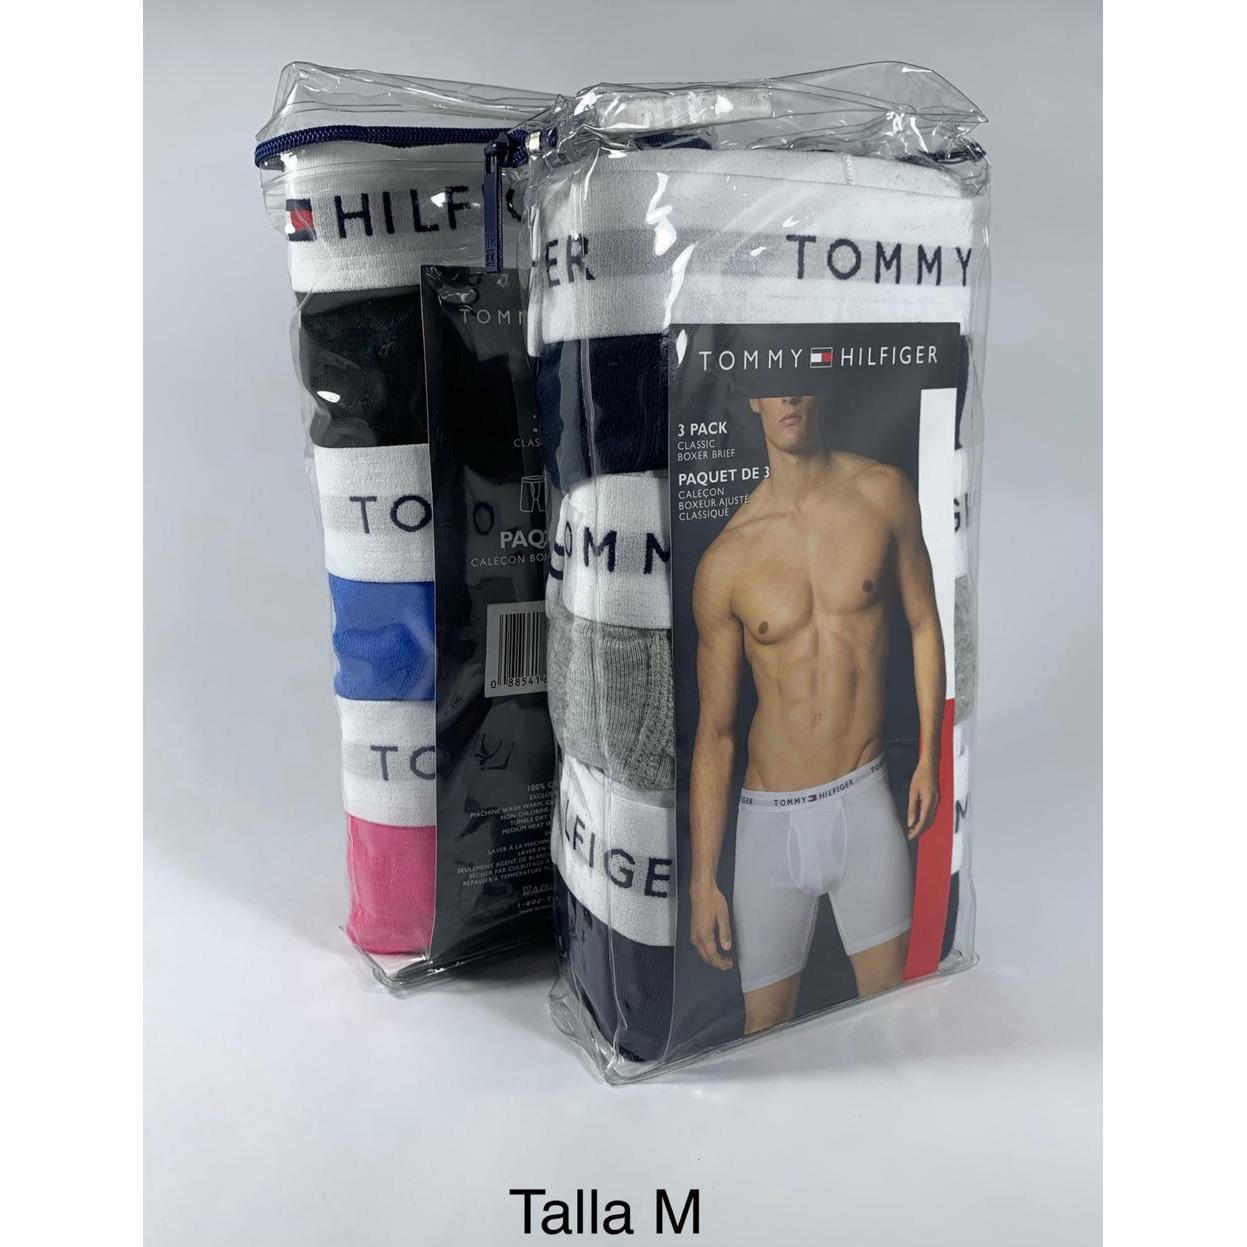 Boxer Hombre - Tommy Hilfiger - 3 unidades (2 azules y 1 gris) - The Gift Shop Costa Rica